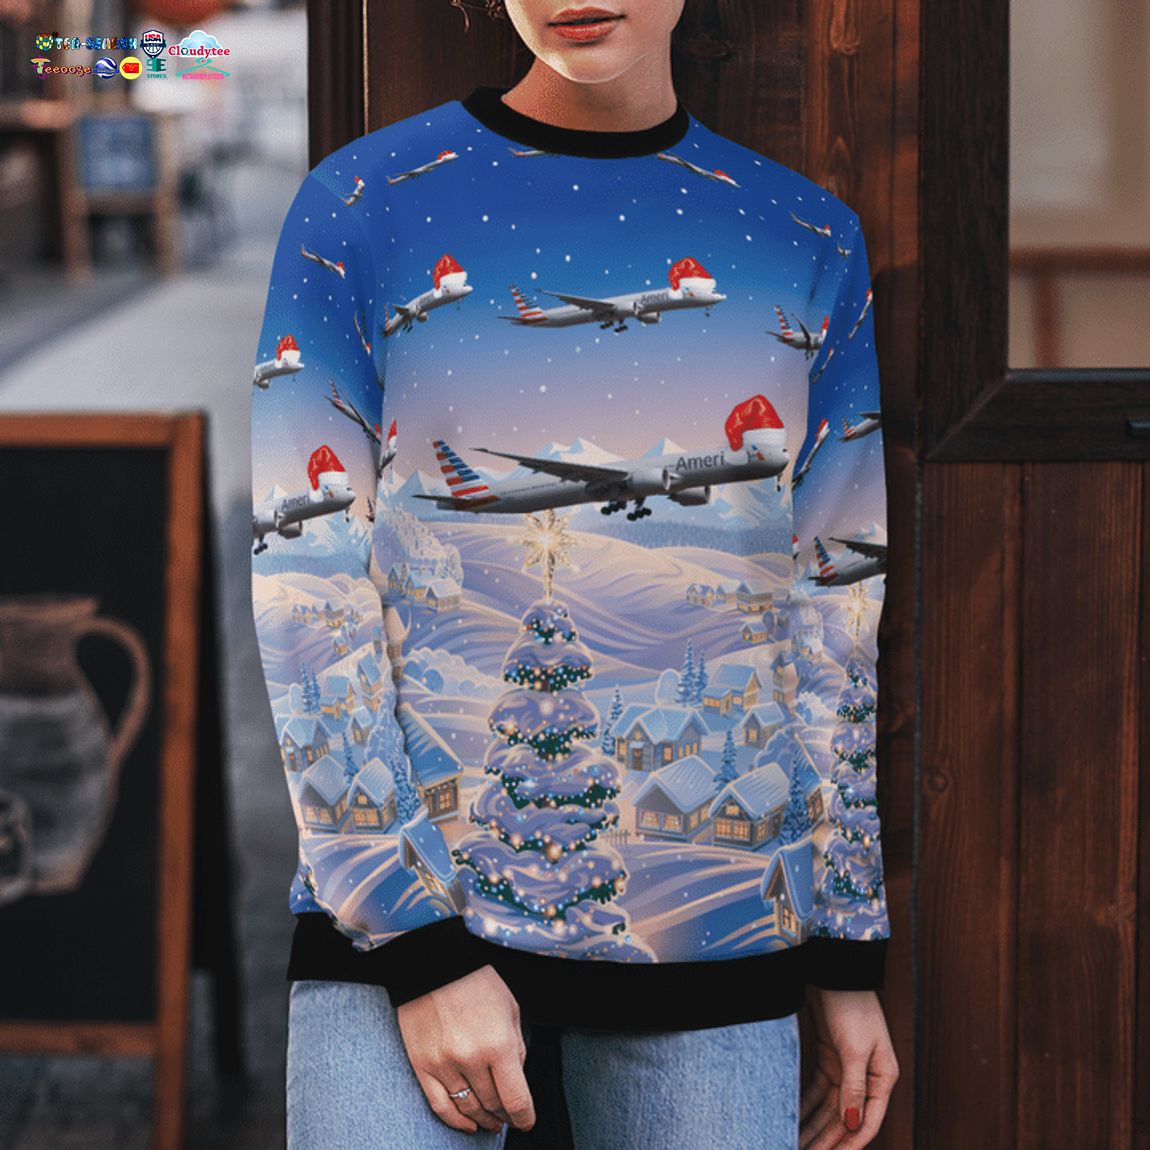 United Airlines Boeing 777-323ER 3D Christmas Sweater - Saleoff